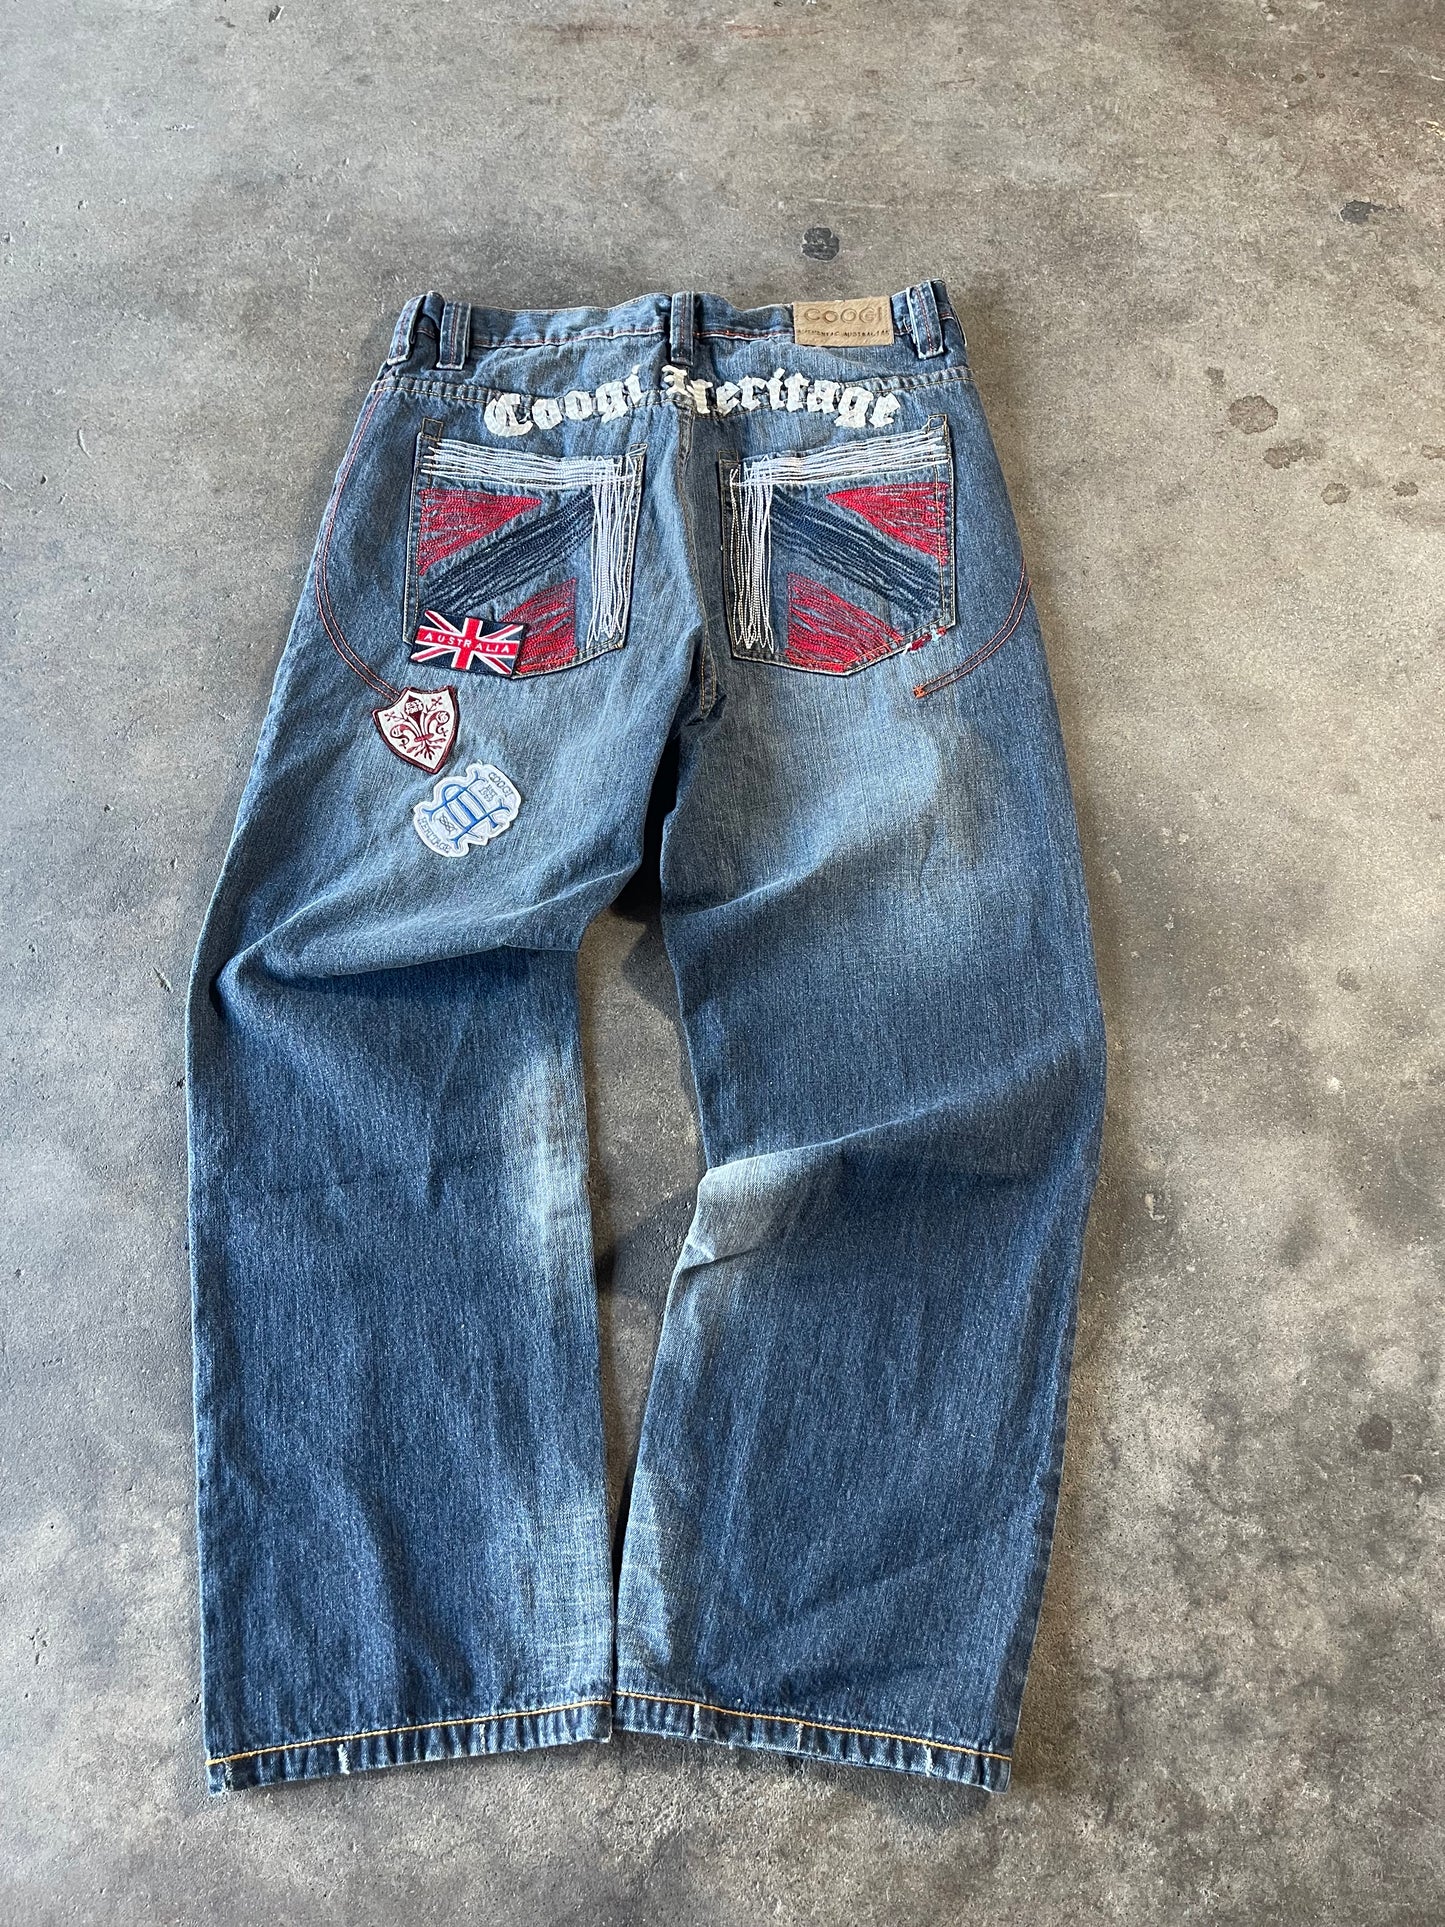 Baggy Coogi Australia Embroidered Jeans 36x32